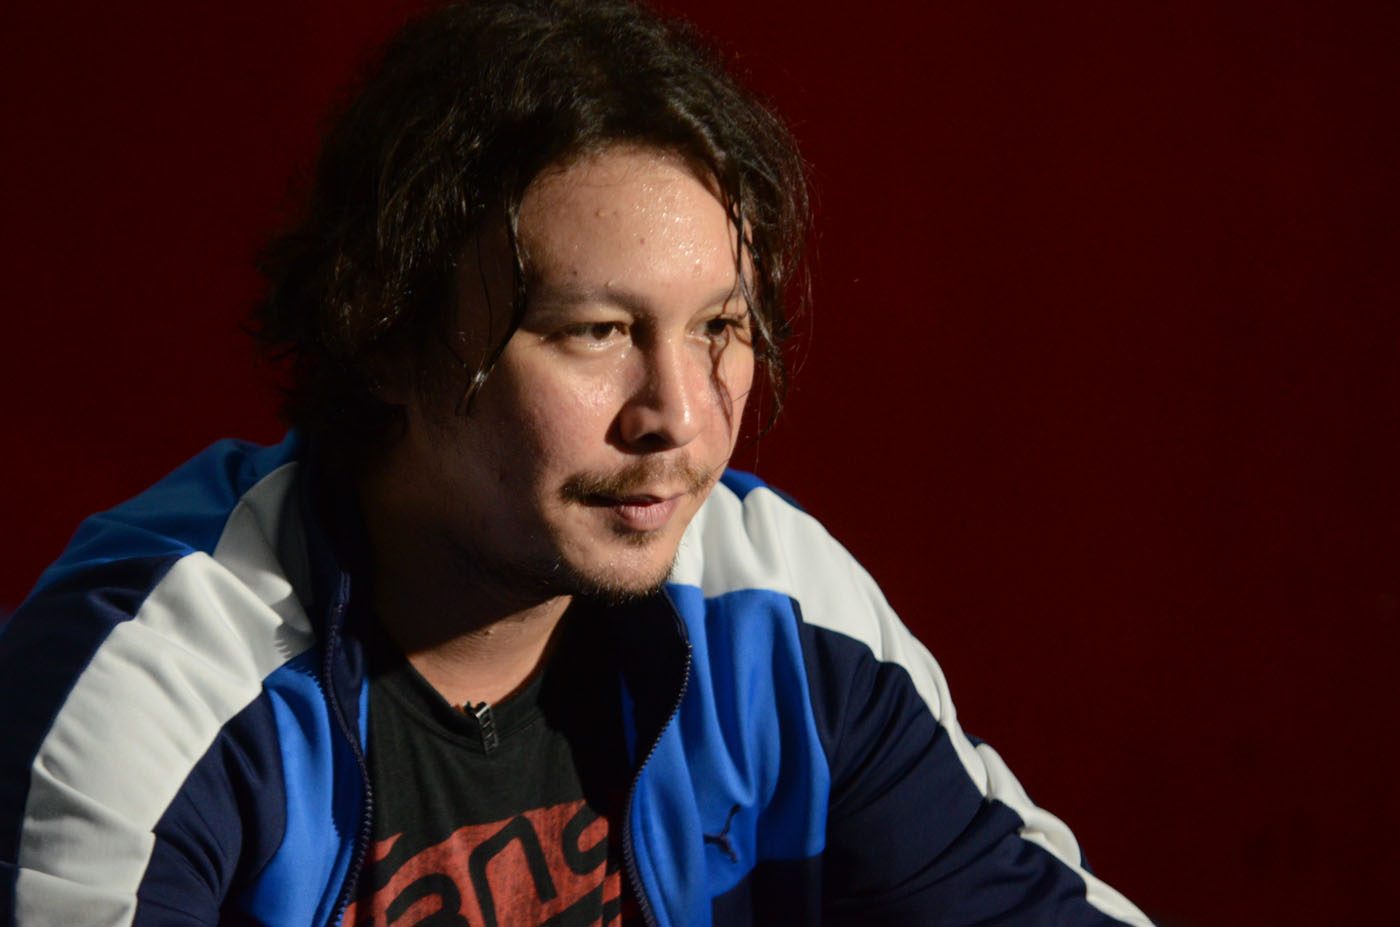 Baron Geisler apologizes to Ping Medina, but raises issues with director on peeing incident